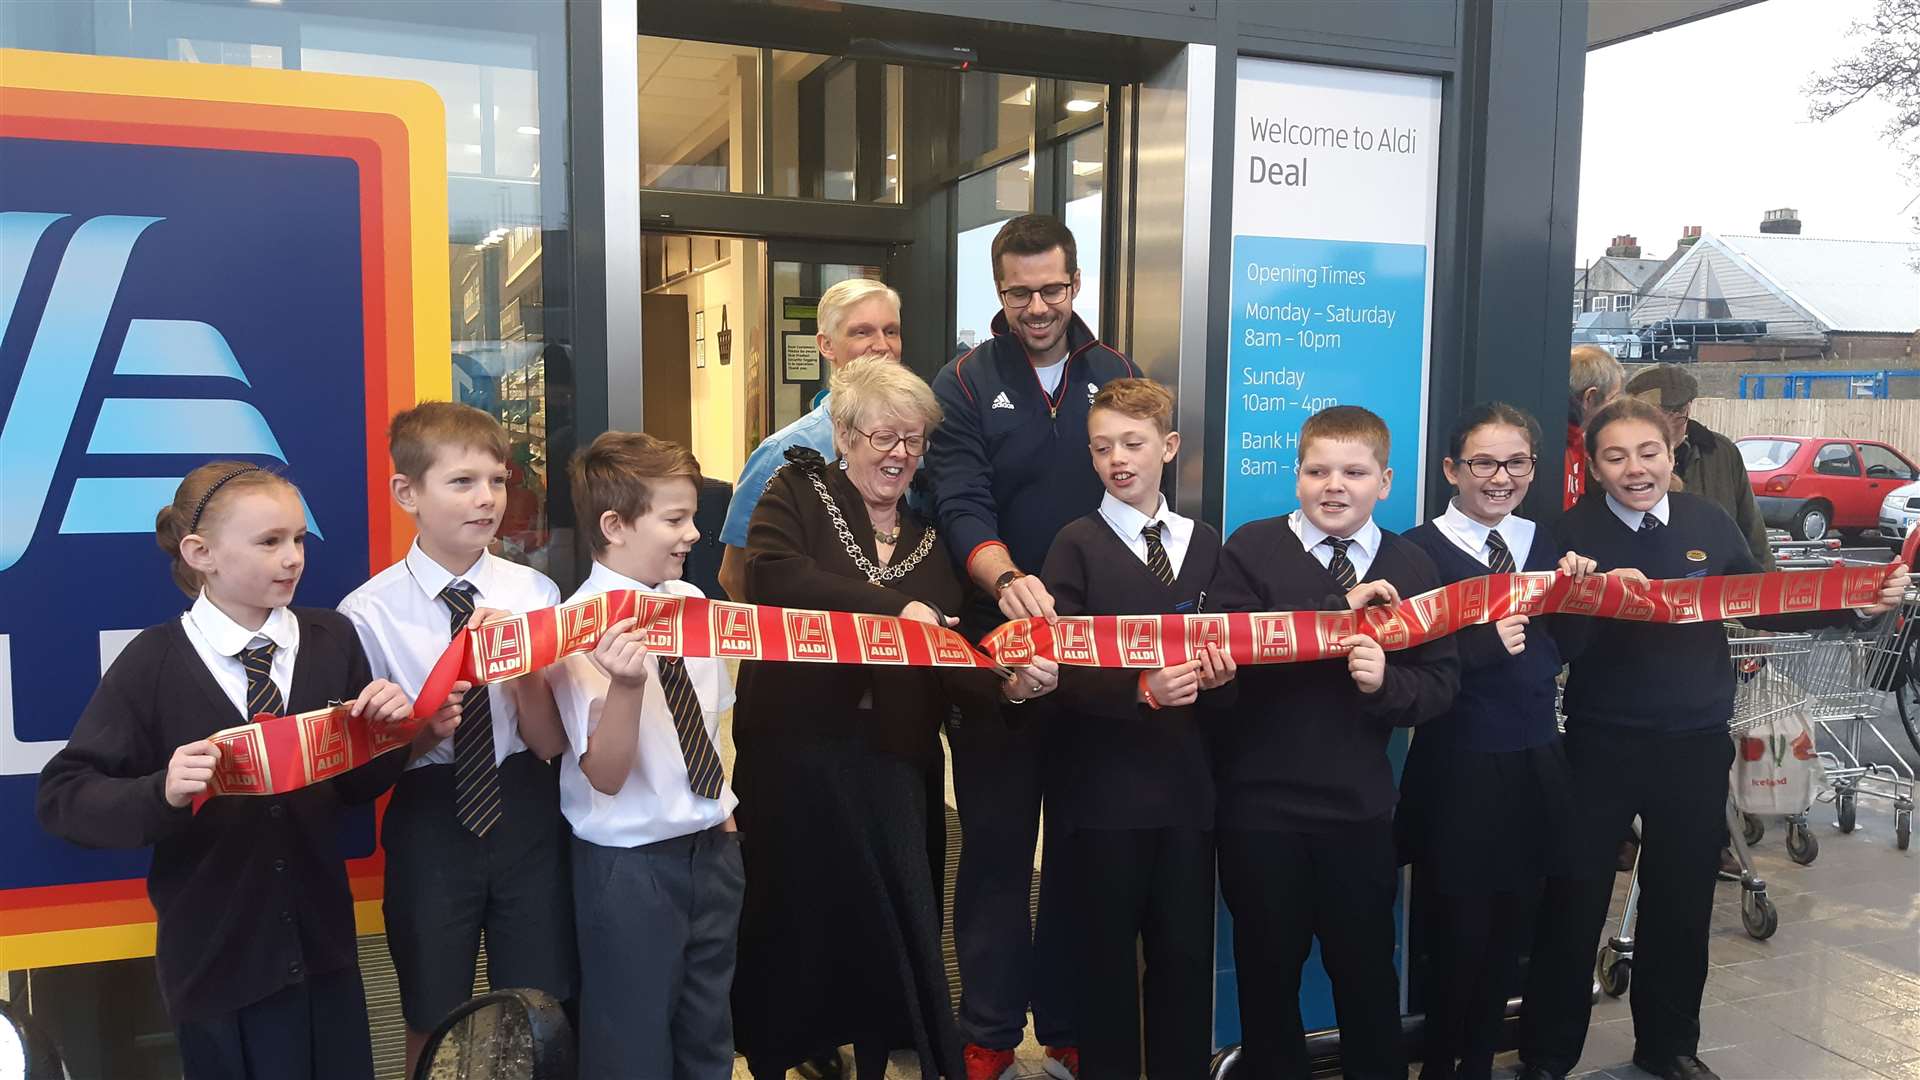 Warden House Primary School pupils joined the Mayor of Deal Eileen Rowbotham and Olympic rower James Foad to cut the ribbon